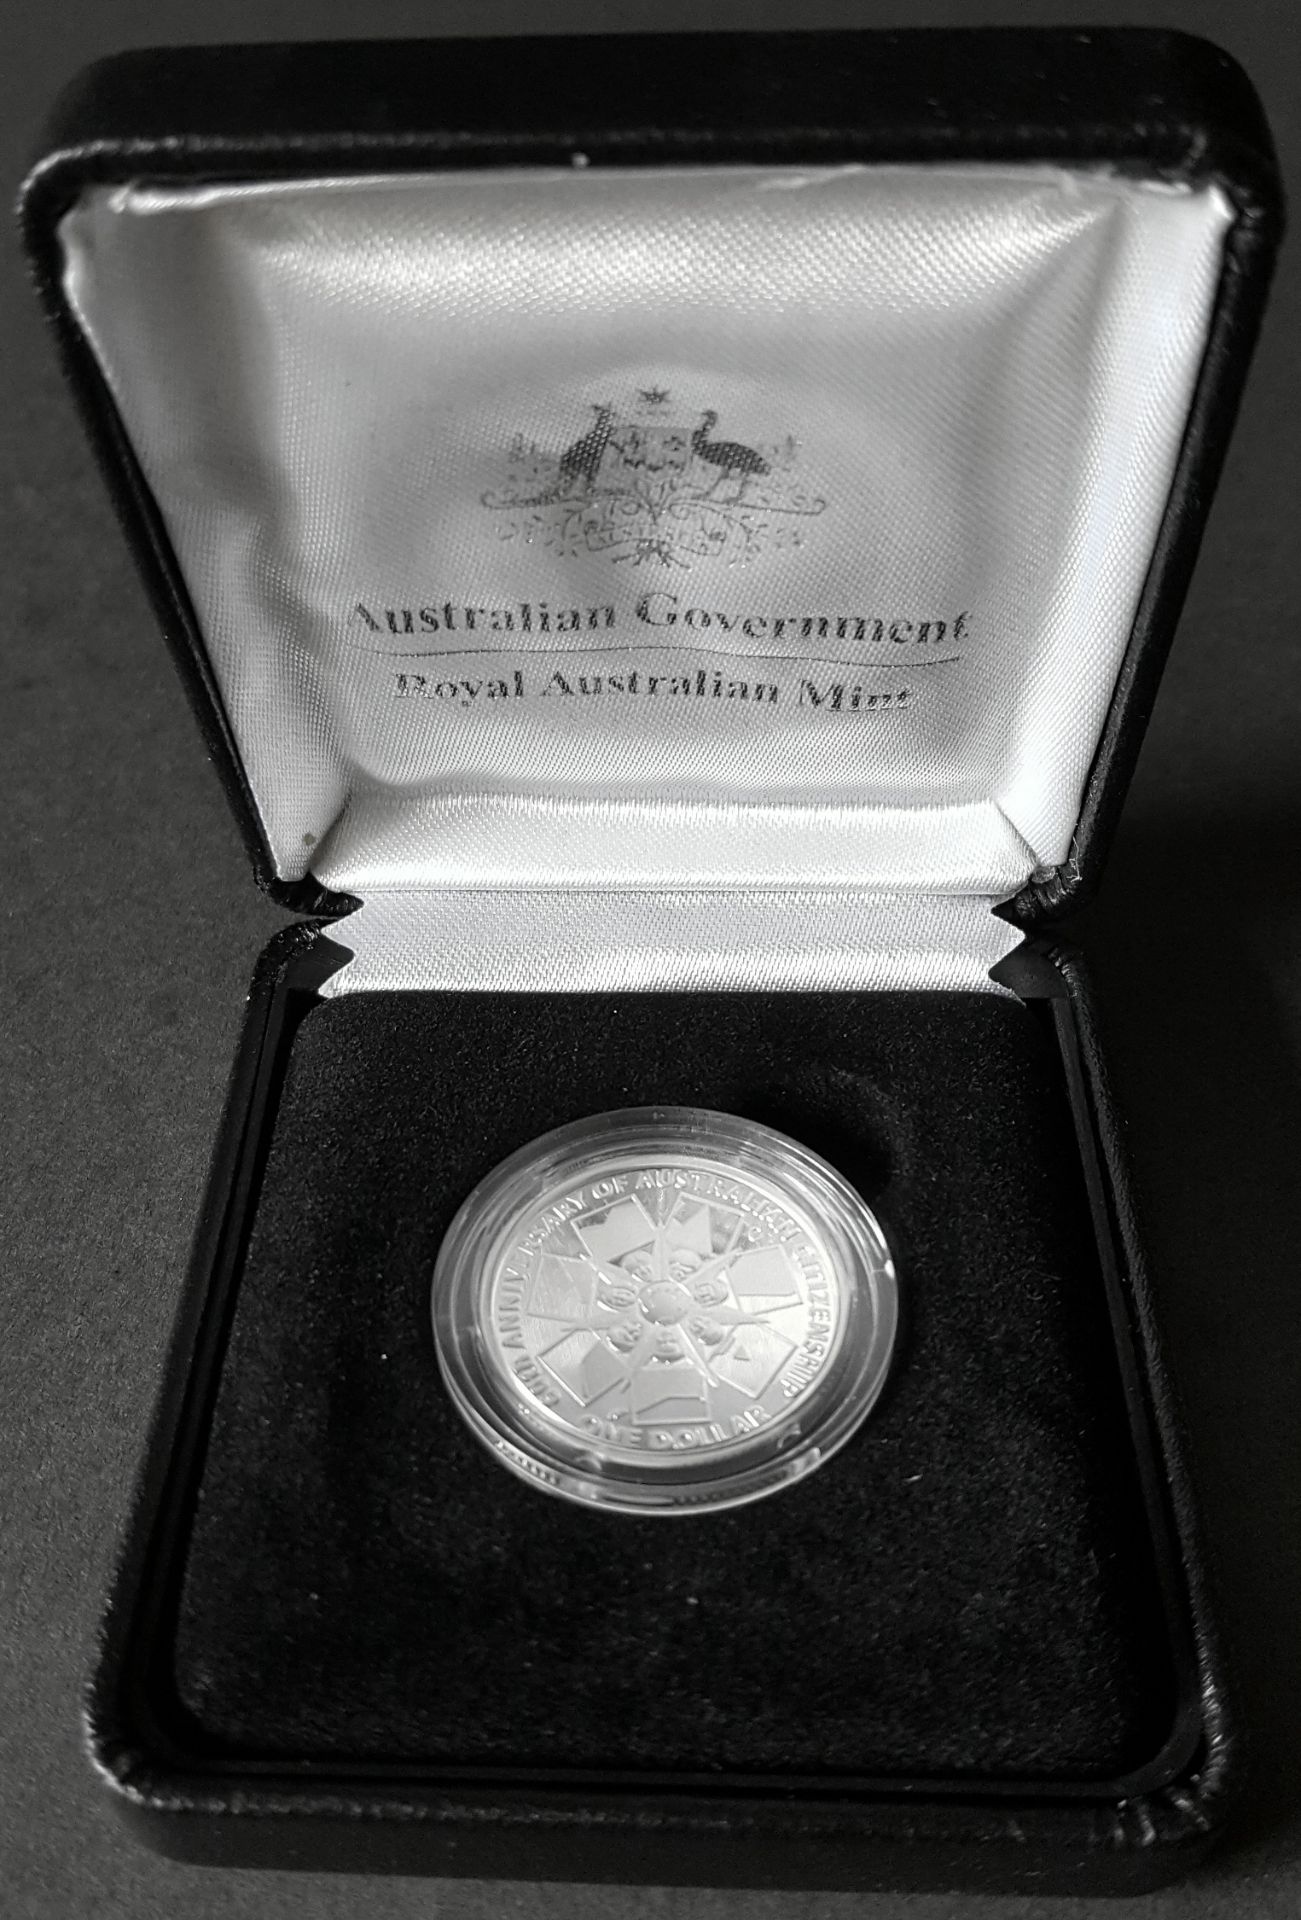 Collectable Proof Coins Silver Royal Australian Mint $1 & Perth Mint $1 Kookaburra - Image 6 of 9